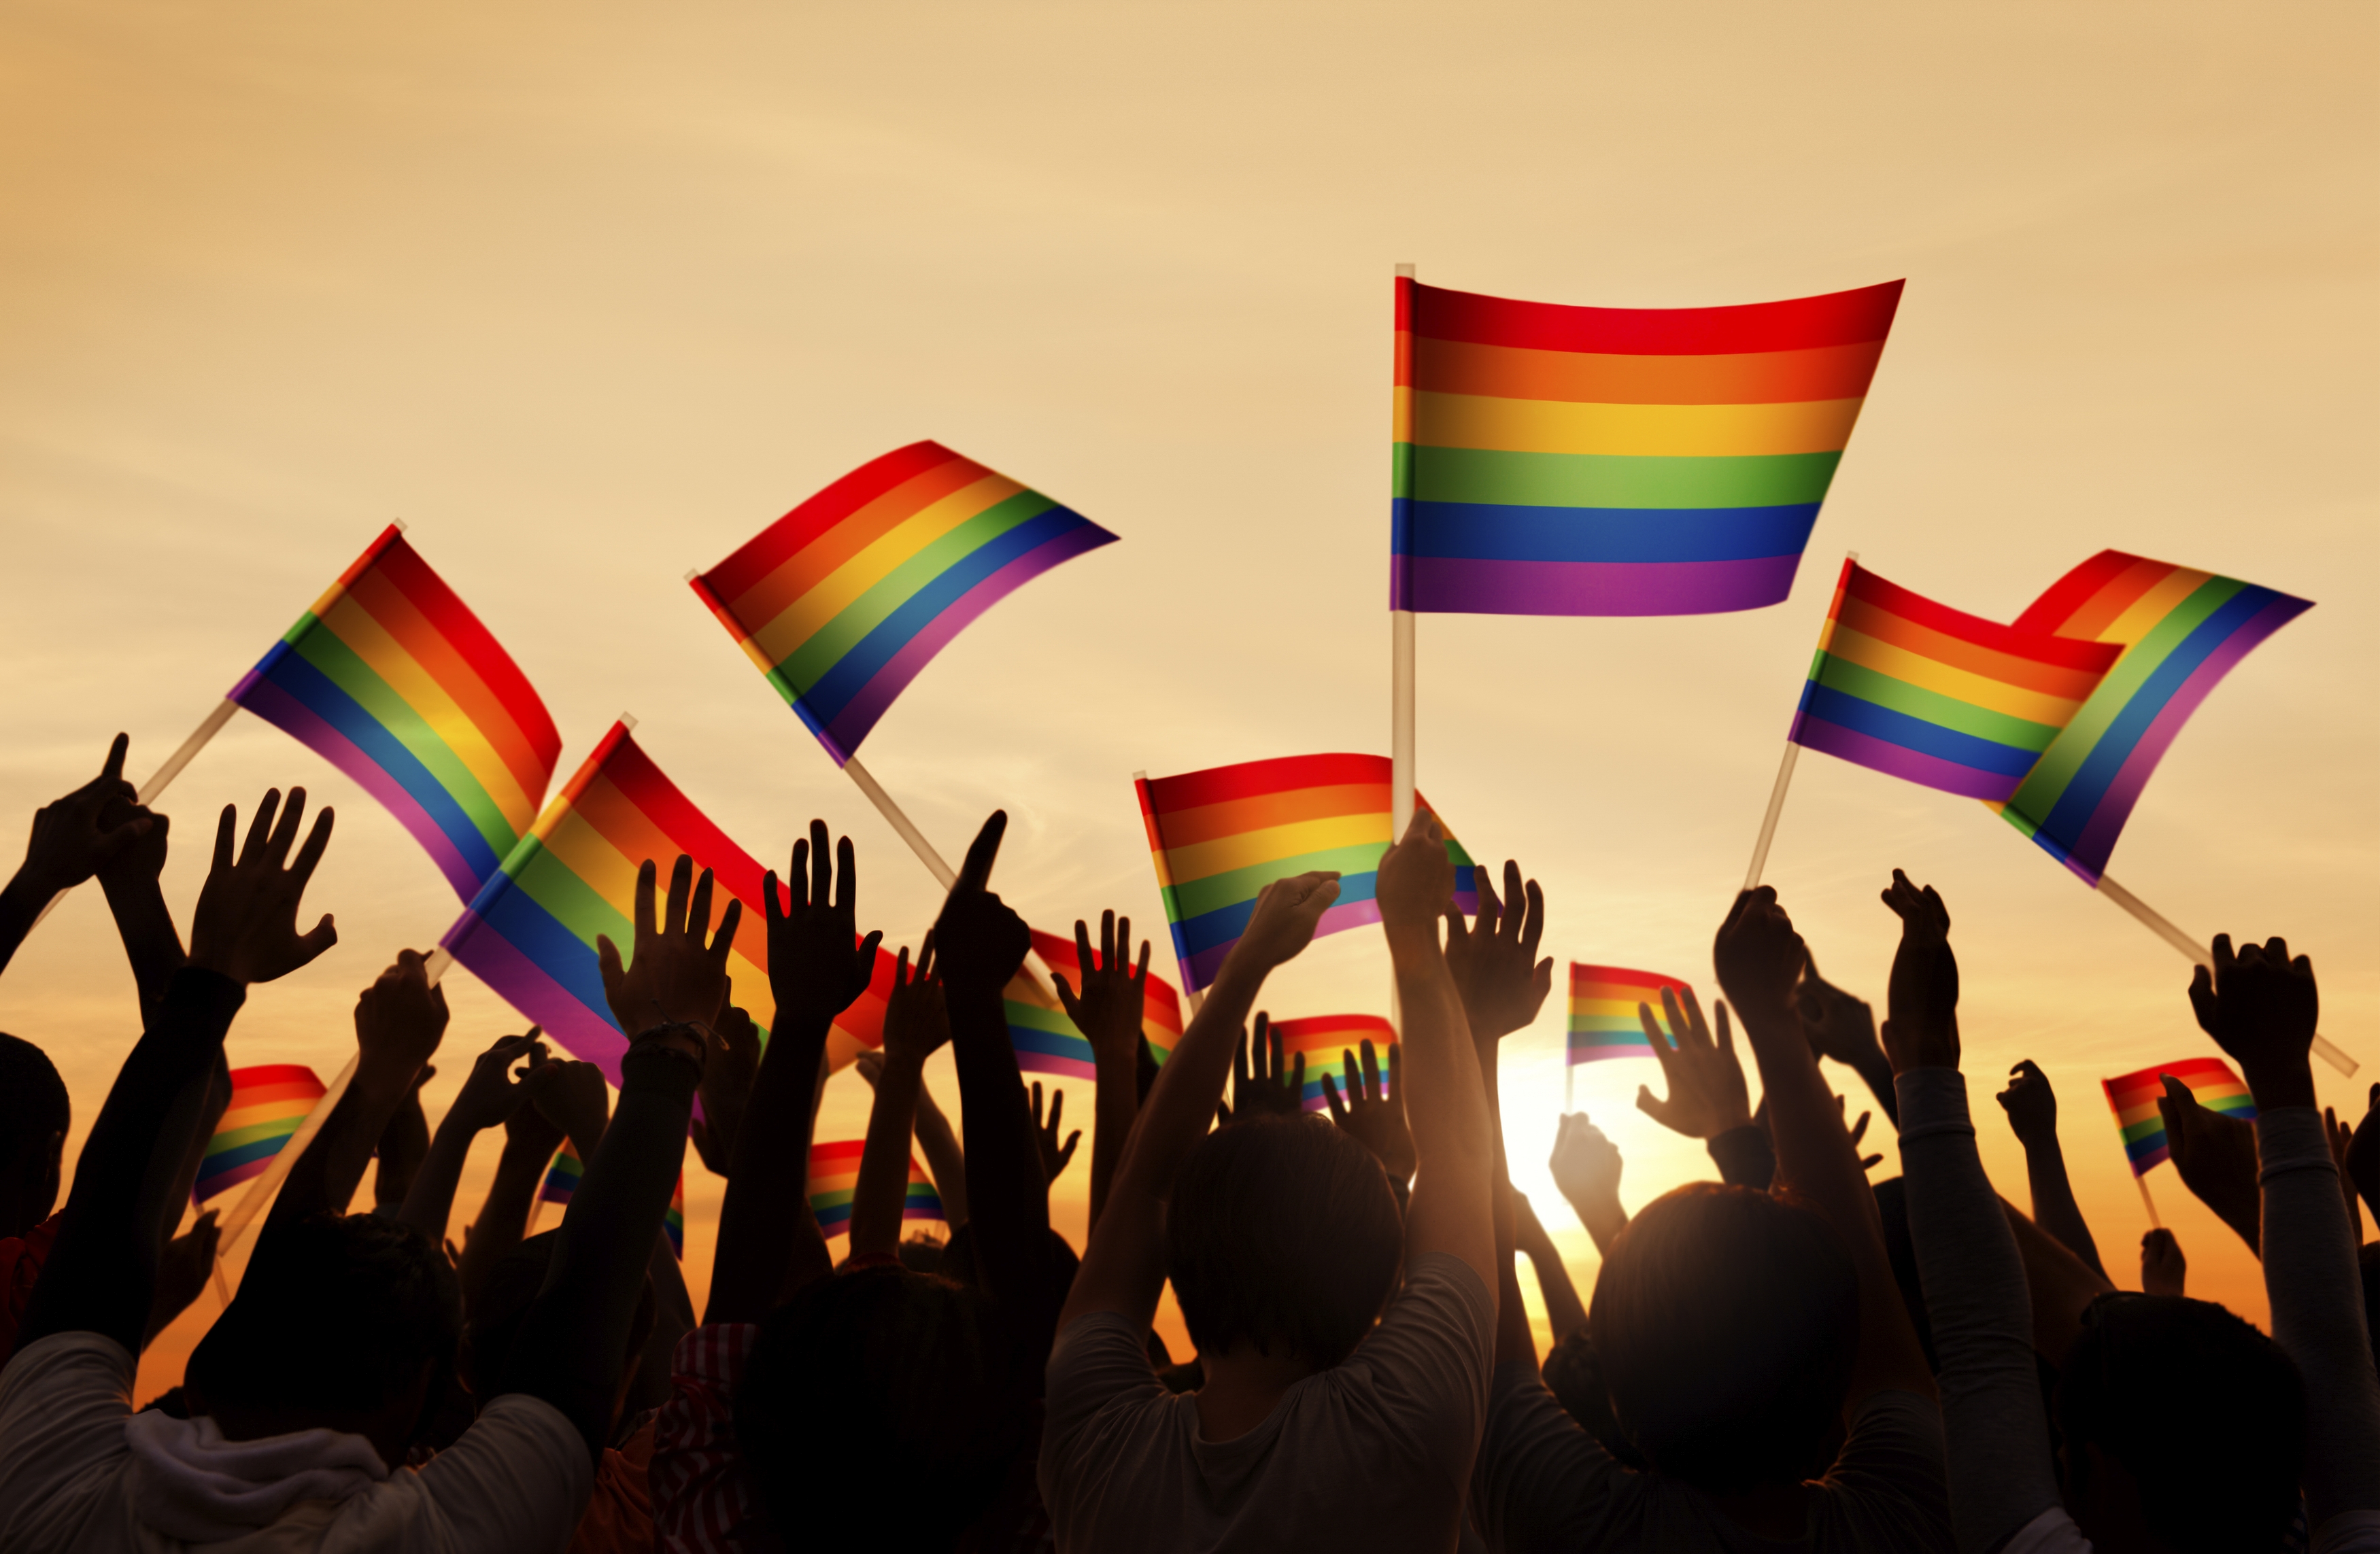 sunsetting over a group of undefined people holding pride flags